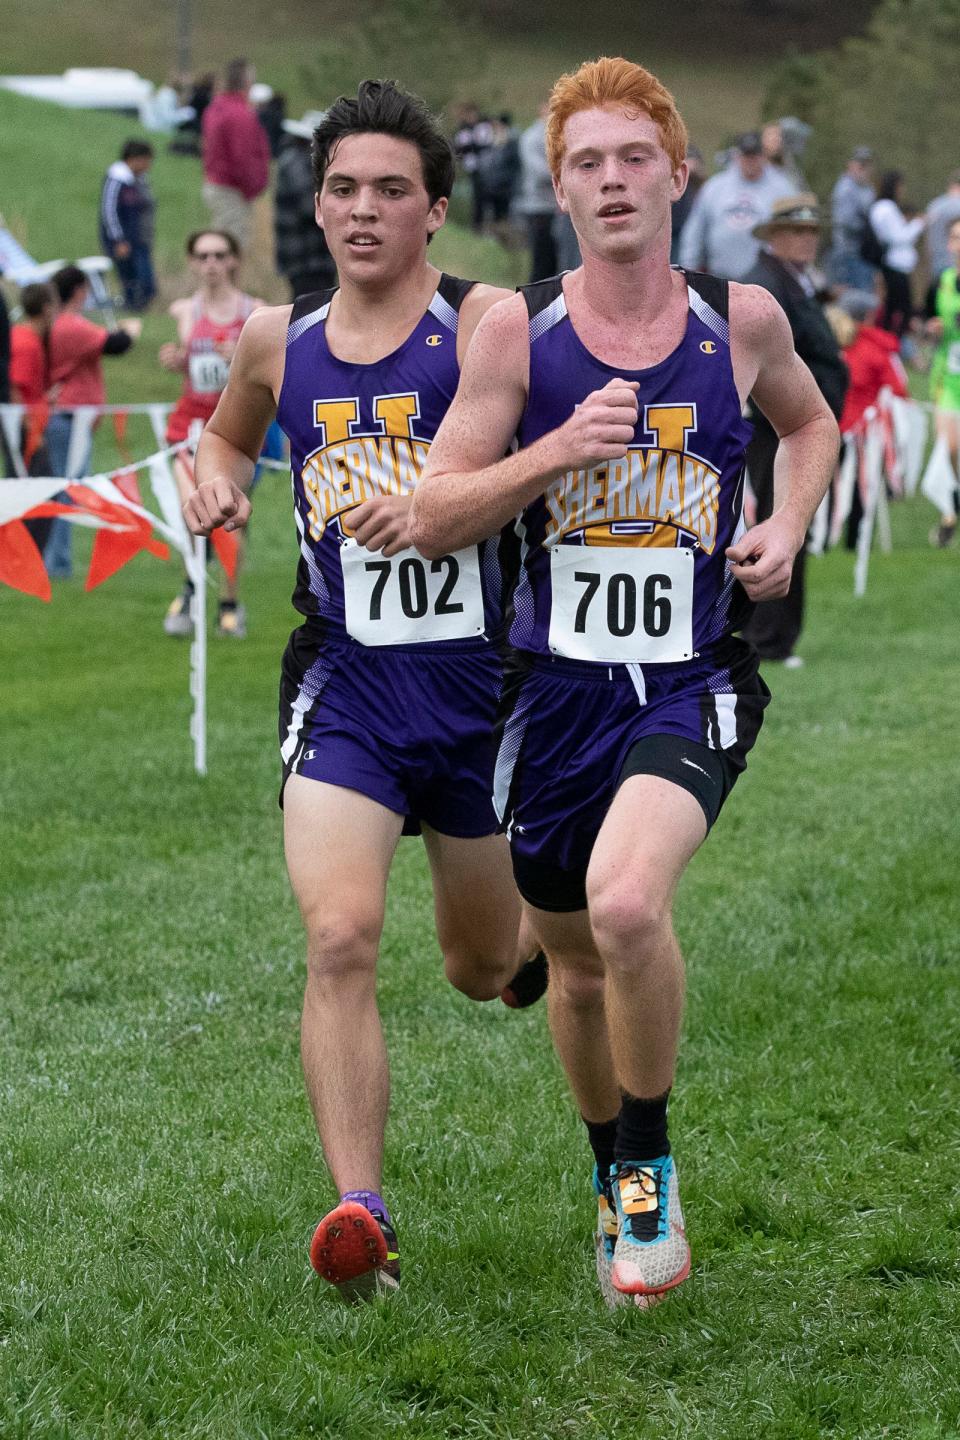 Unioto’s Corey Schobelock, right, and Gabe Lynch took first and second place respectively at the 2021 Southeast District Cross Country met on Oct. 23, 2021. Schobelock, a senior, was named the Gazette's cross country runner of the year.